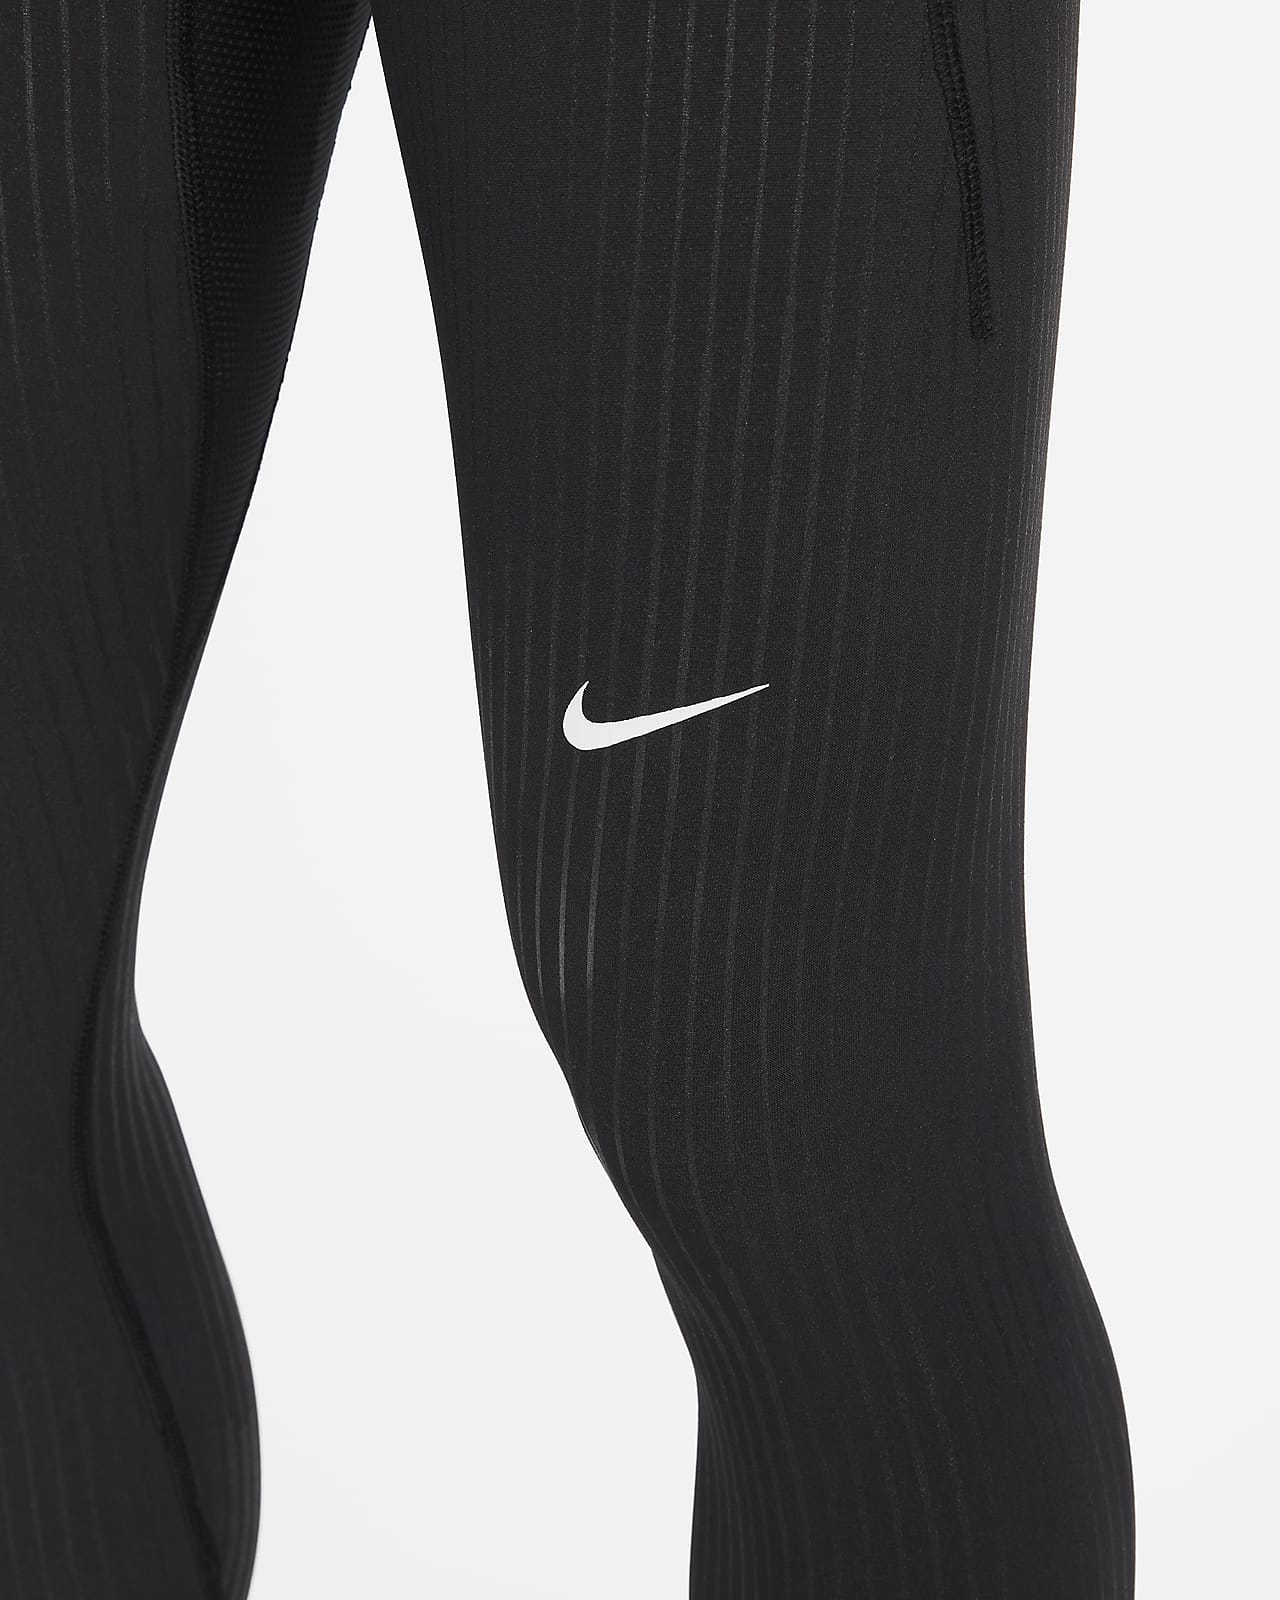 Nike Pro DRI FIT ADV Recovery Tights DD1705-068 (Size LARGE) NWT MSRP $110